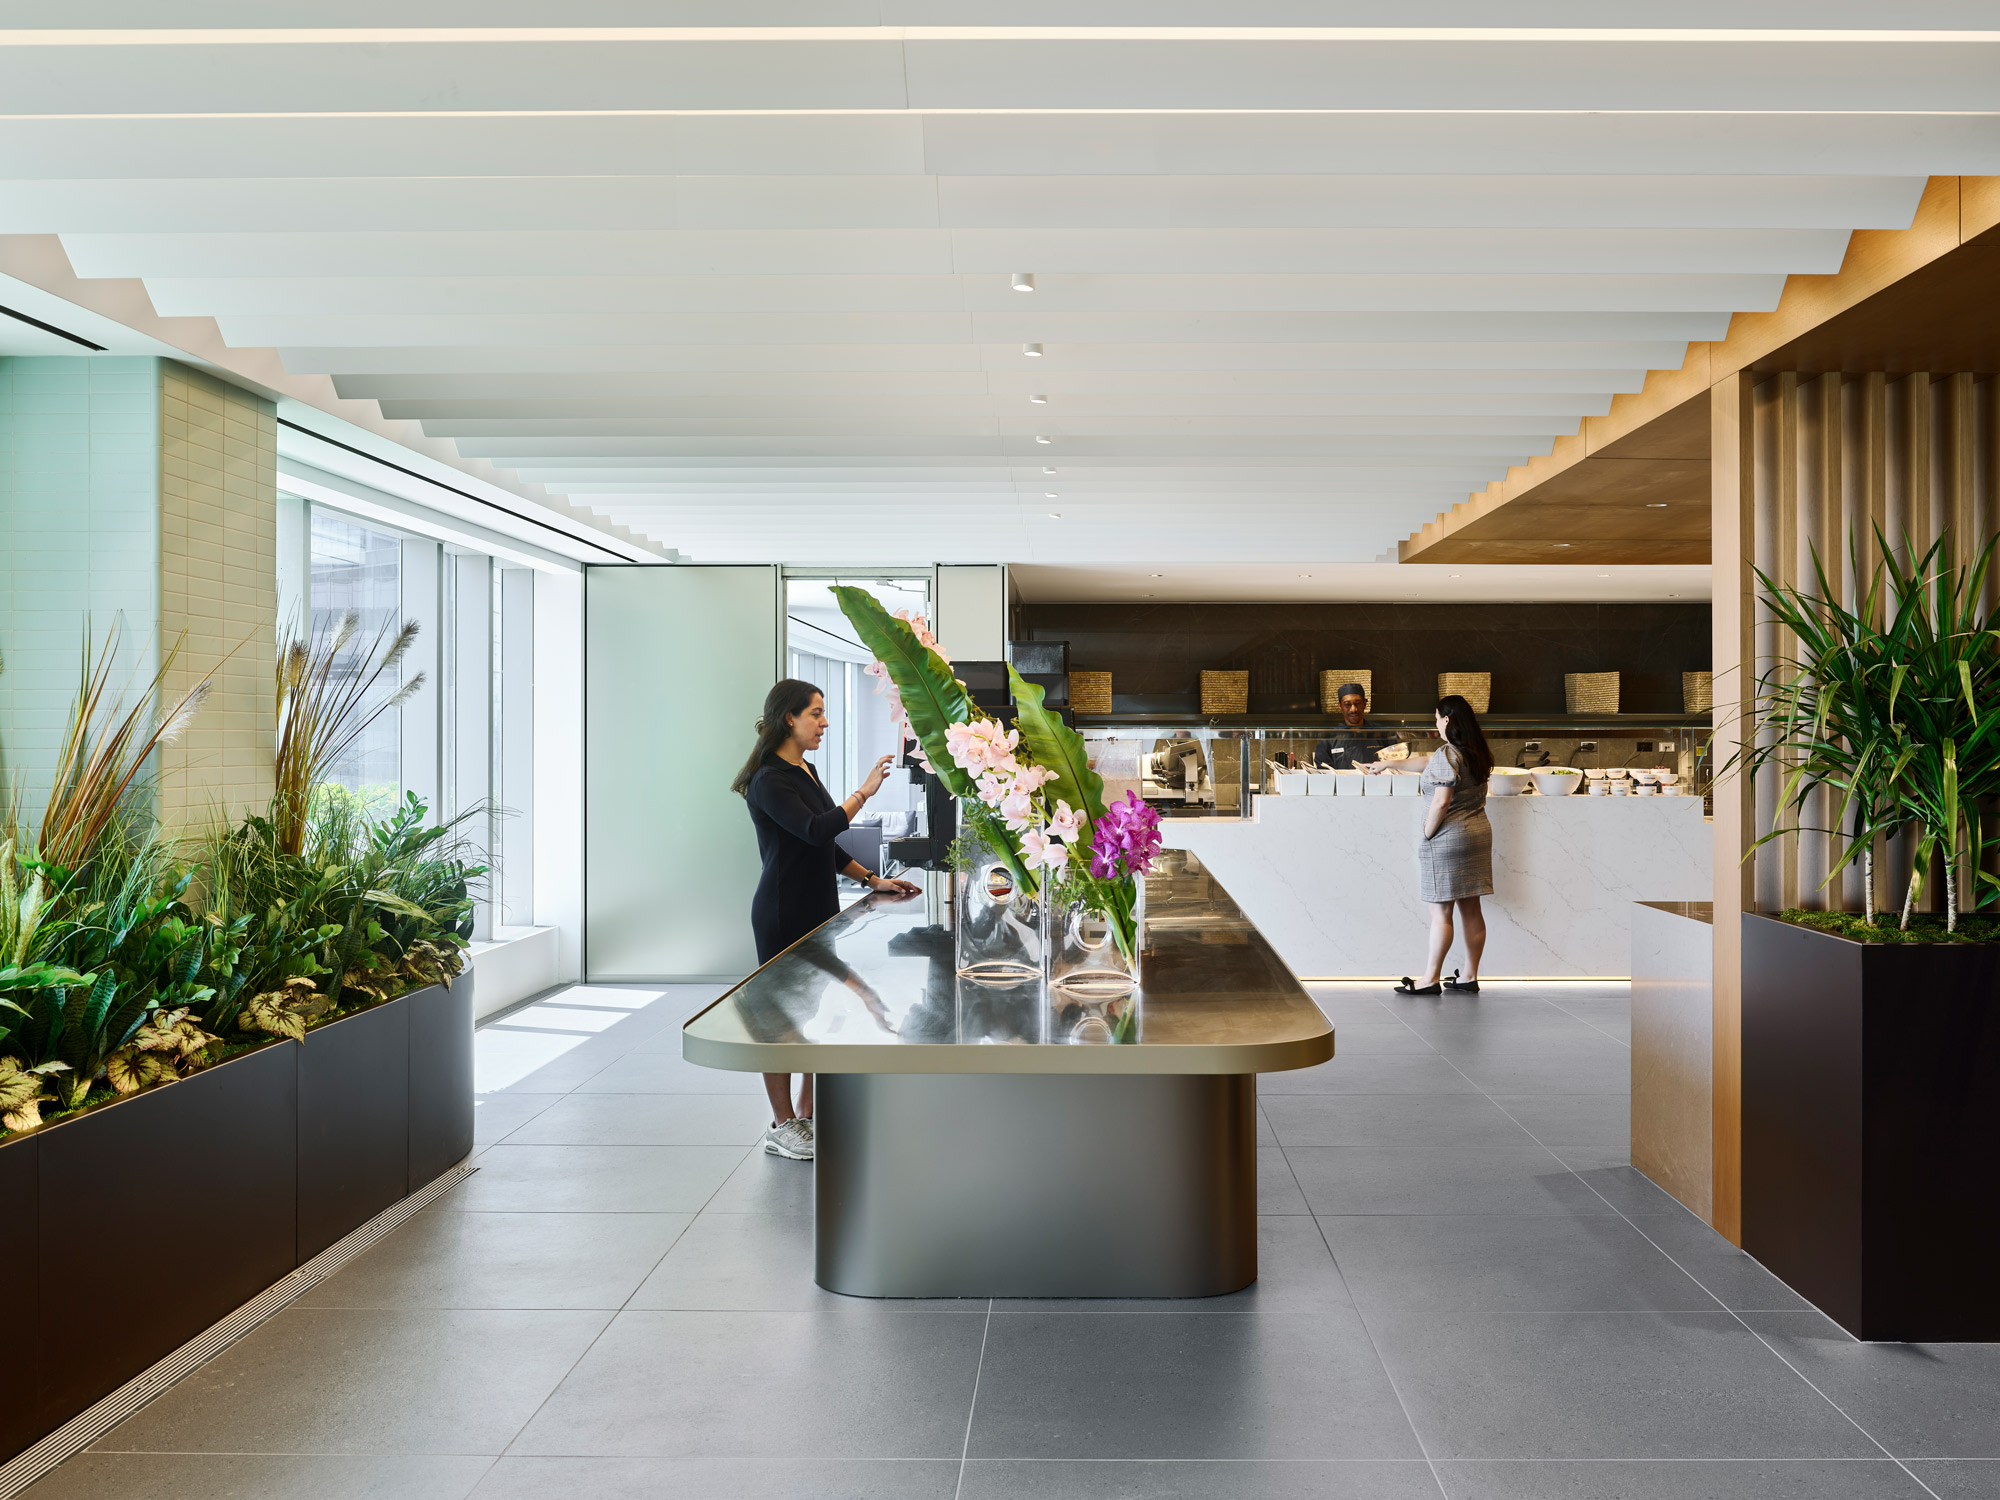 A reception area in a modern office featuring a sculptural desk, ample greenery, and natural lighting.